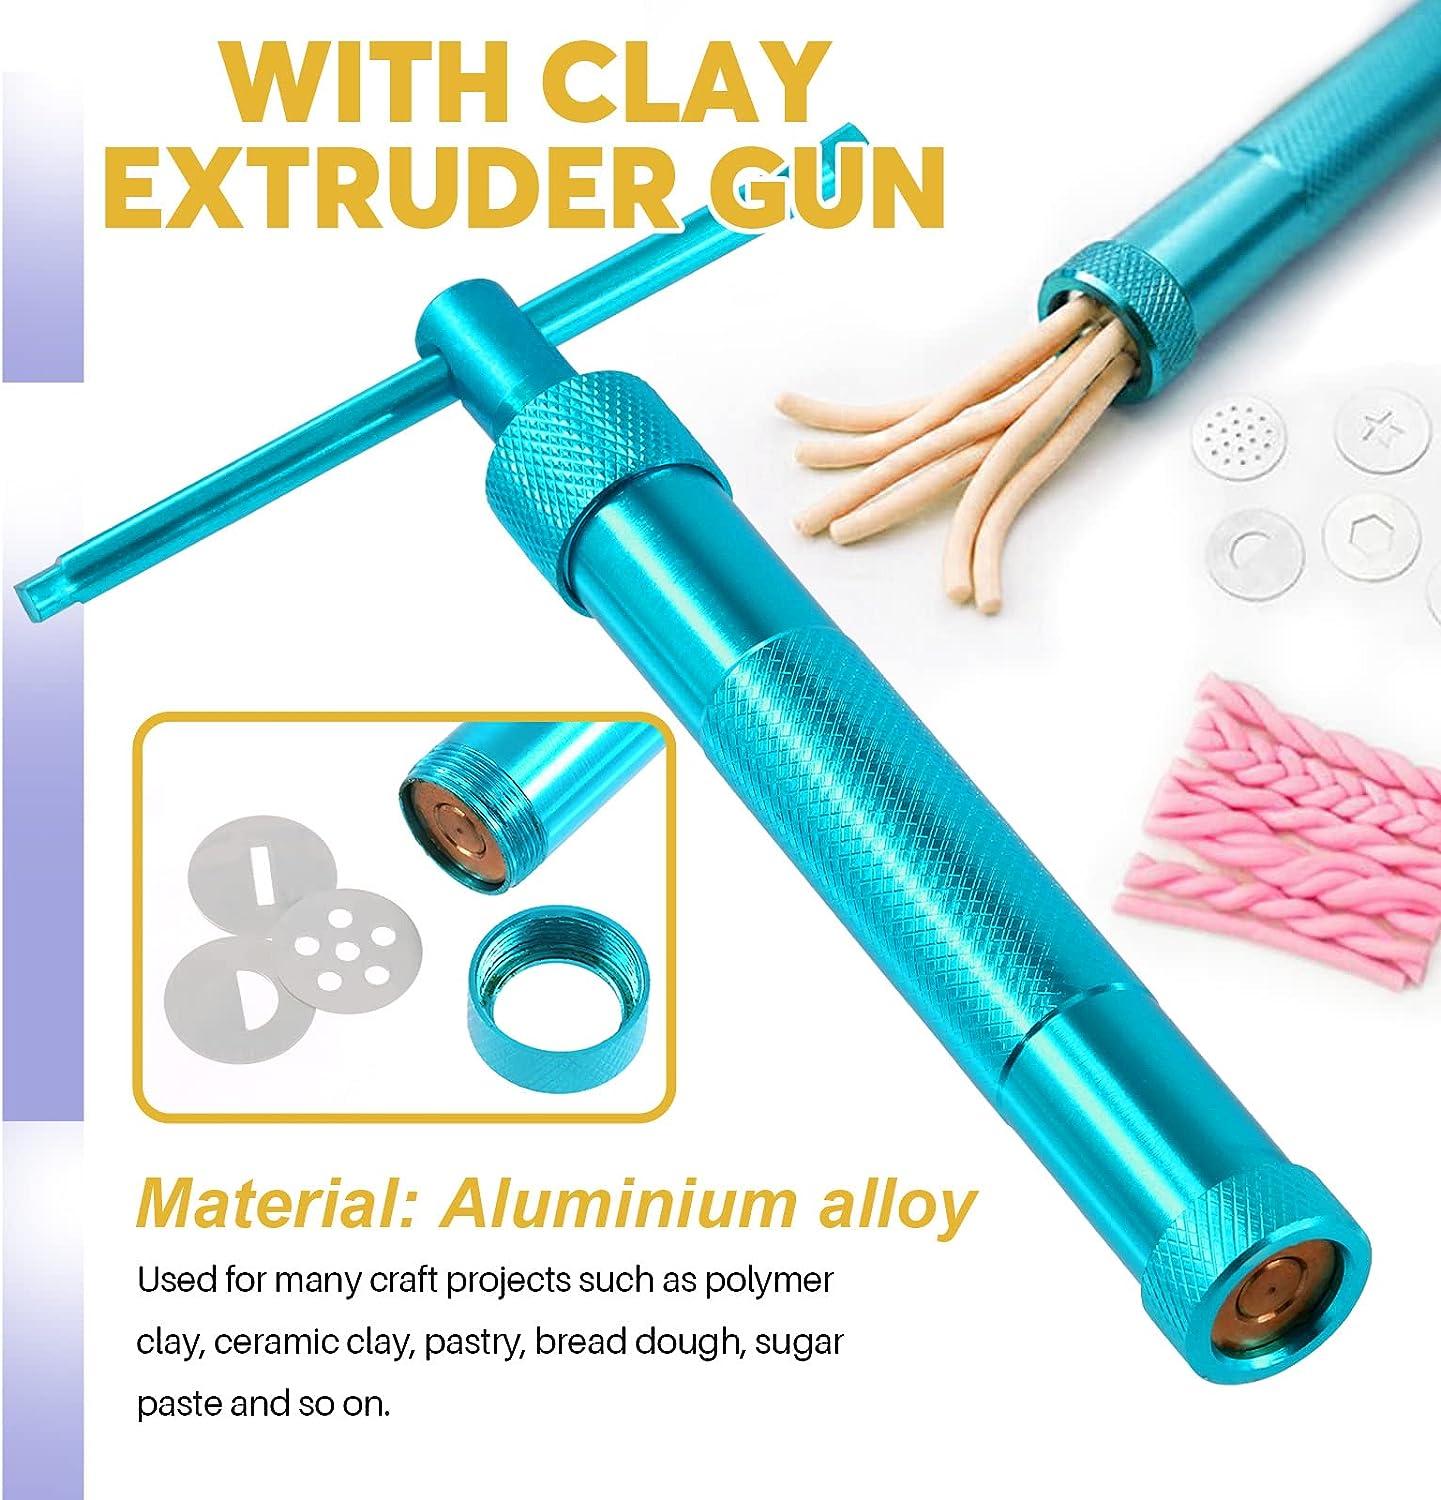 Octpeak Clay Extruder Stainless Steel Rotating Squeezer Kit For Pottery  Ceramic Sculpture Craft,Clay Squeezer Tool,Clay Tools 